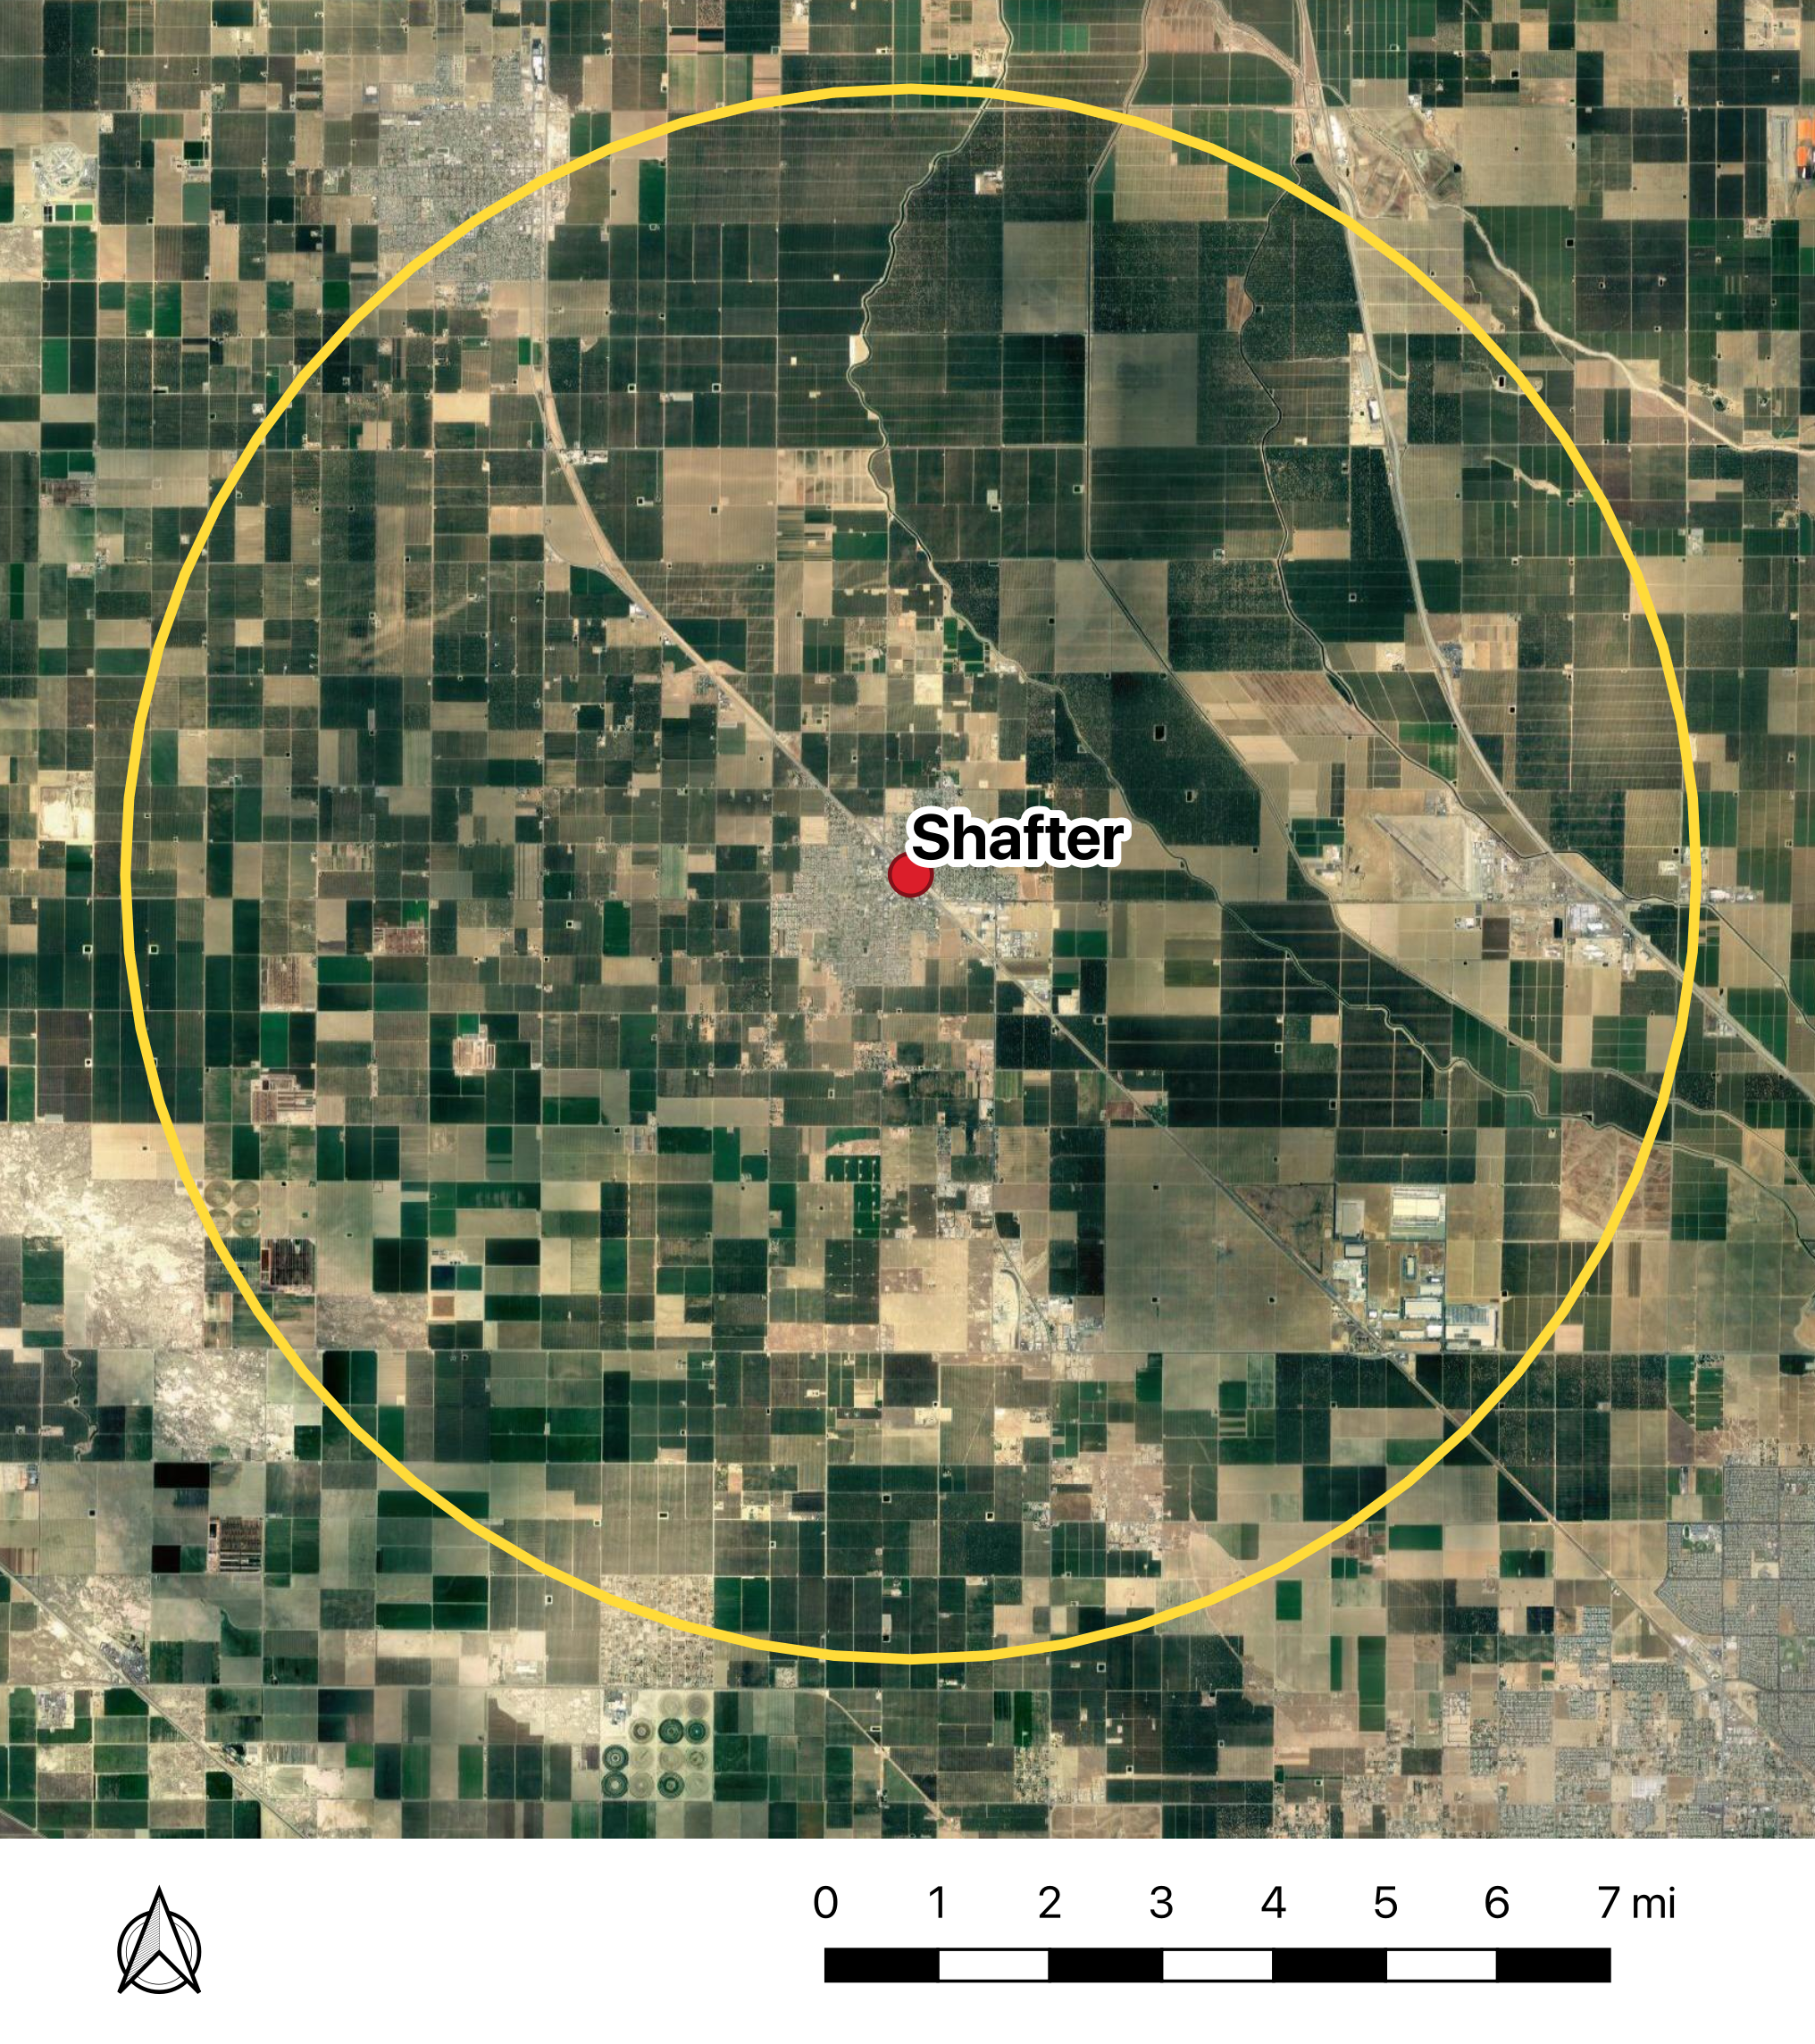 A map showing a 7-mile radius around the city of Shafter, where the proposed pesticide public notification system would be implemented.